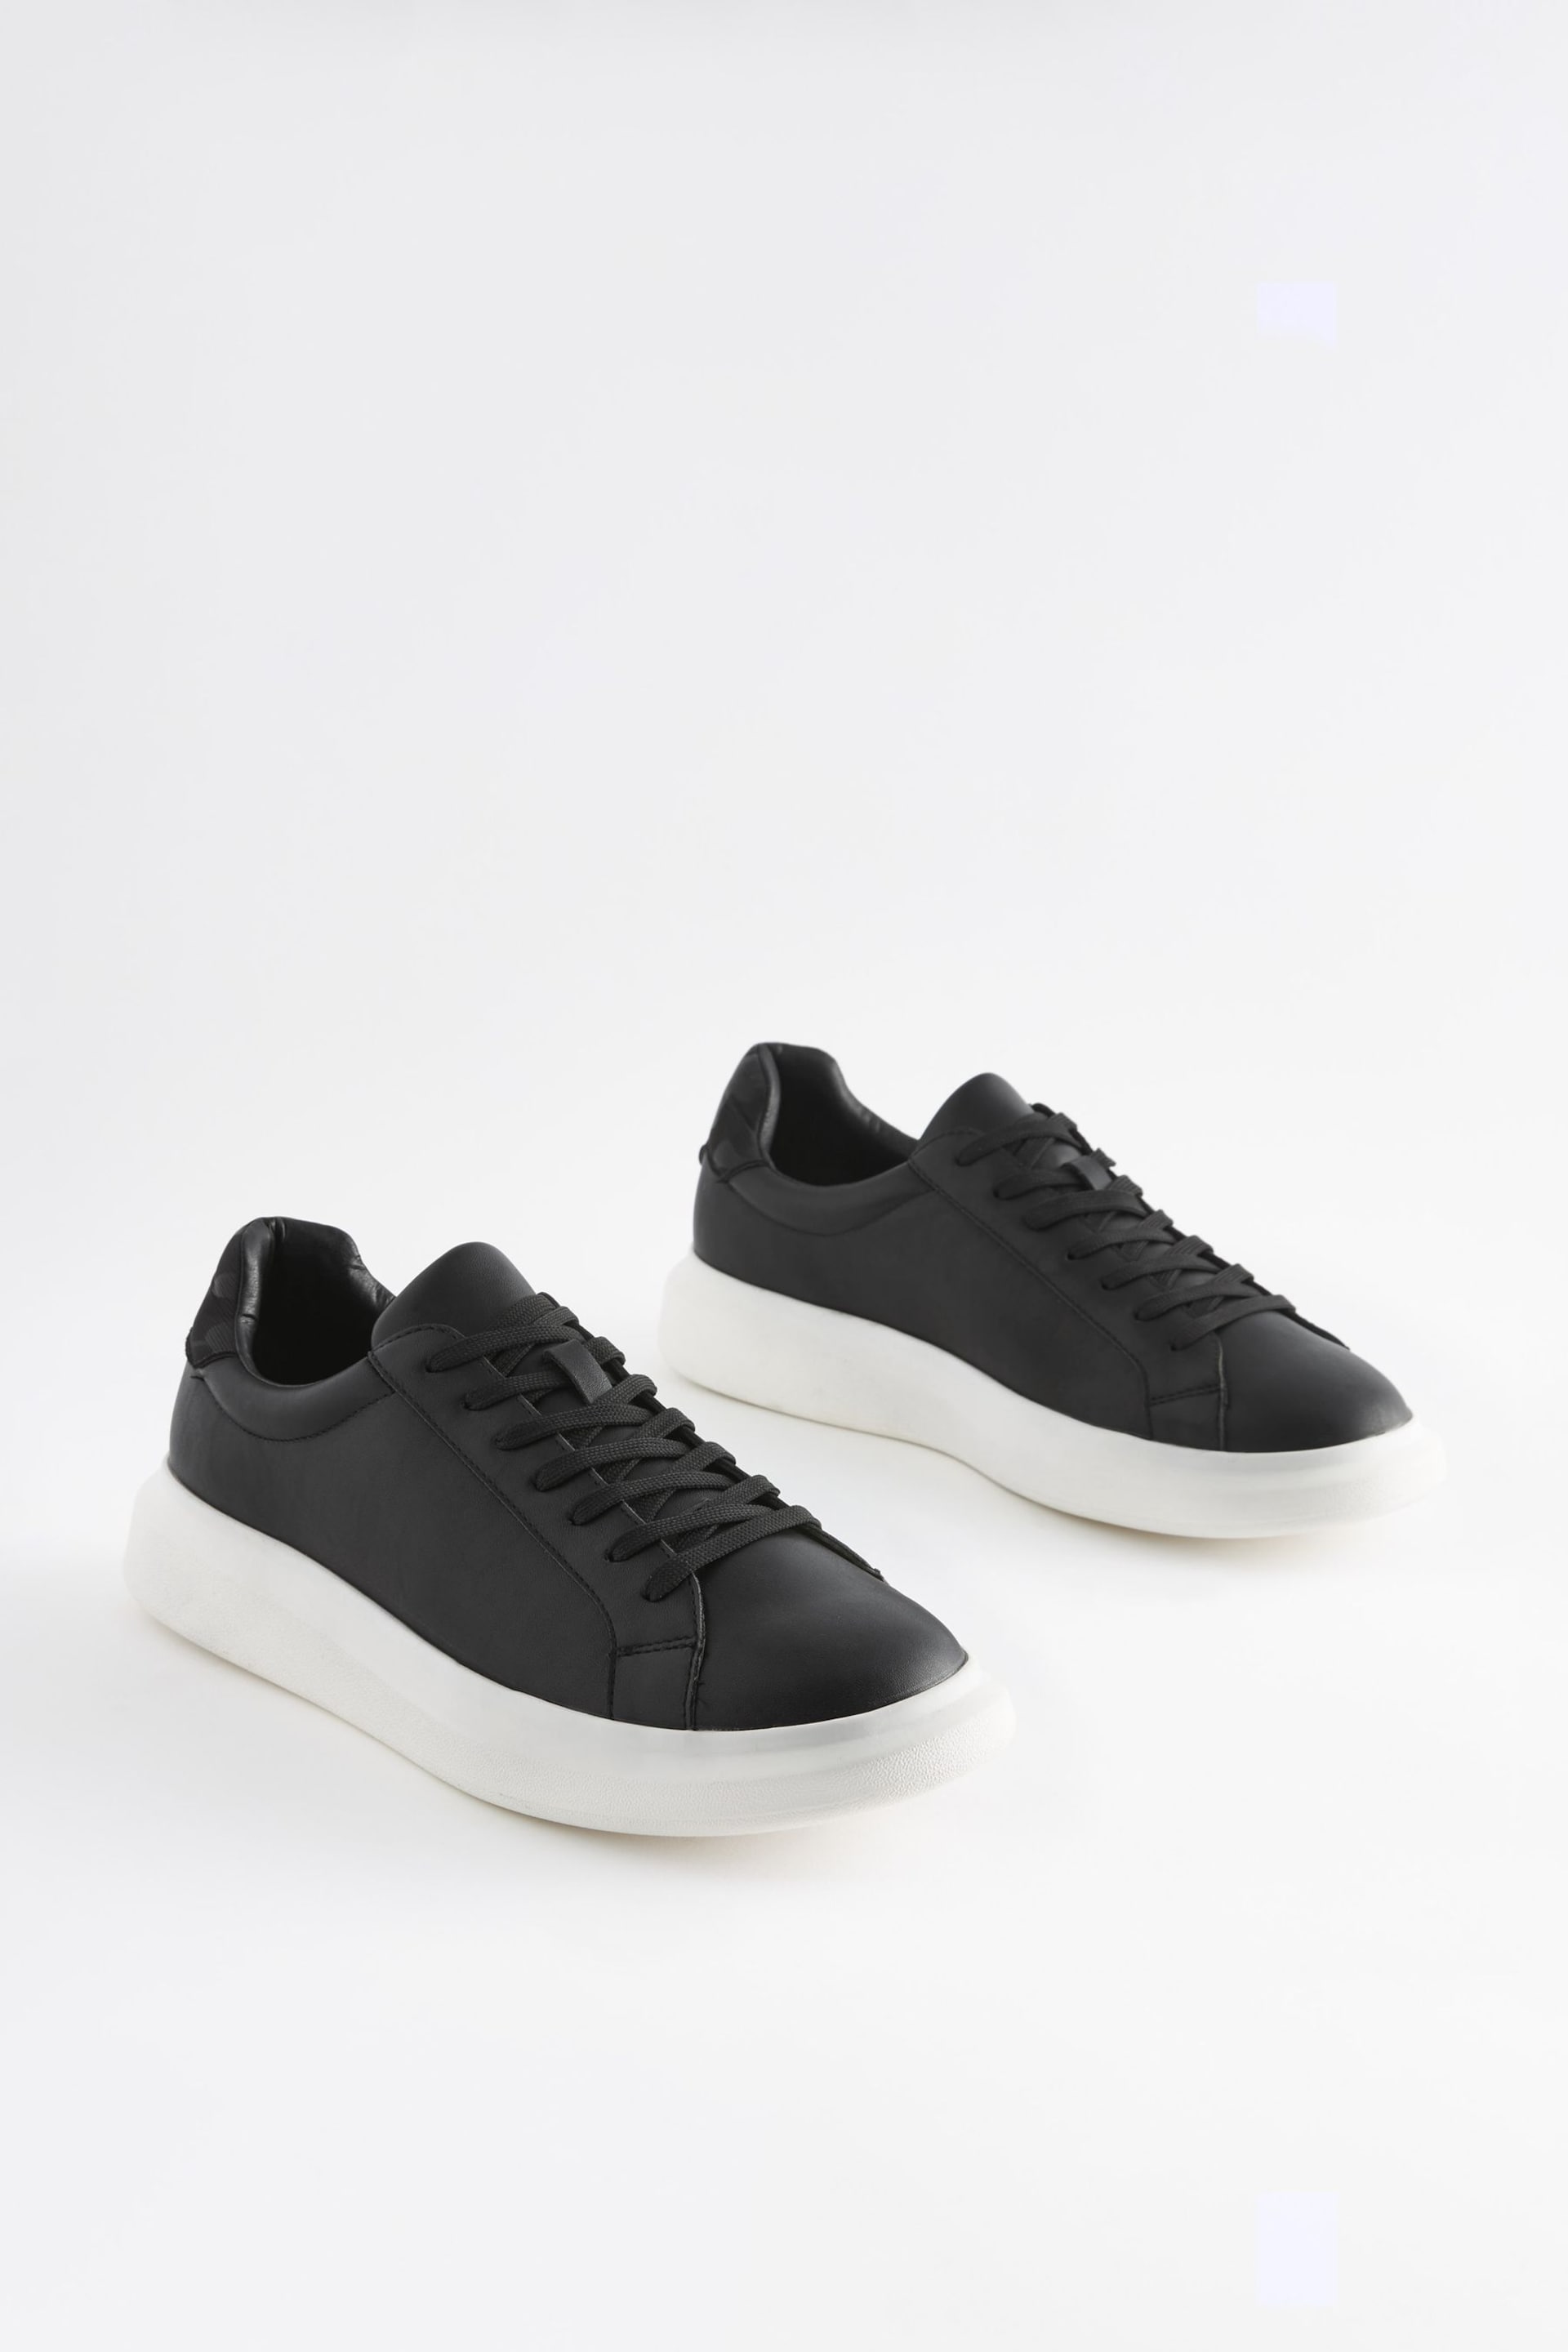 Black EDIT Chunky Trainers - Image 2 of 6